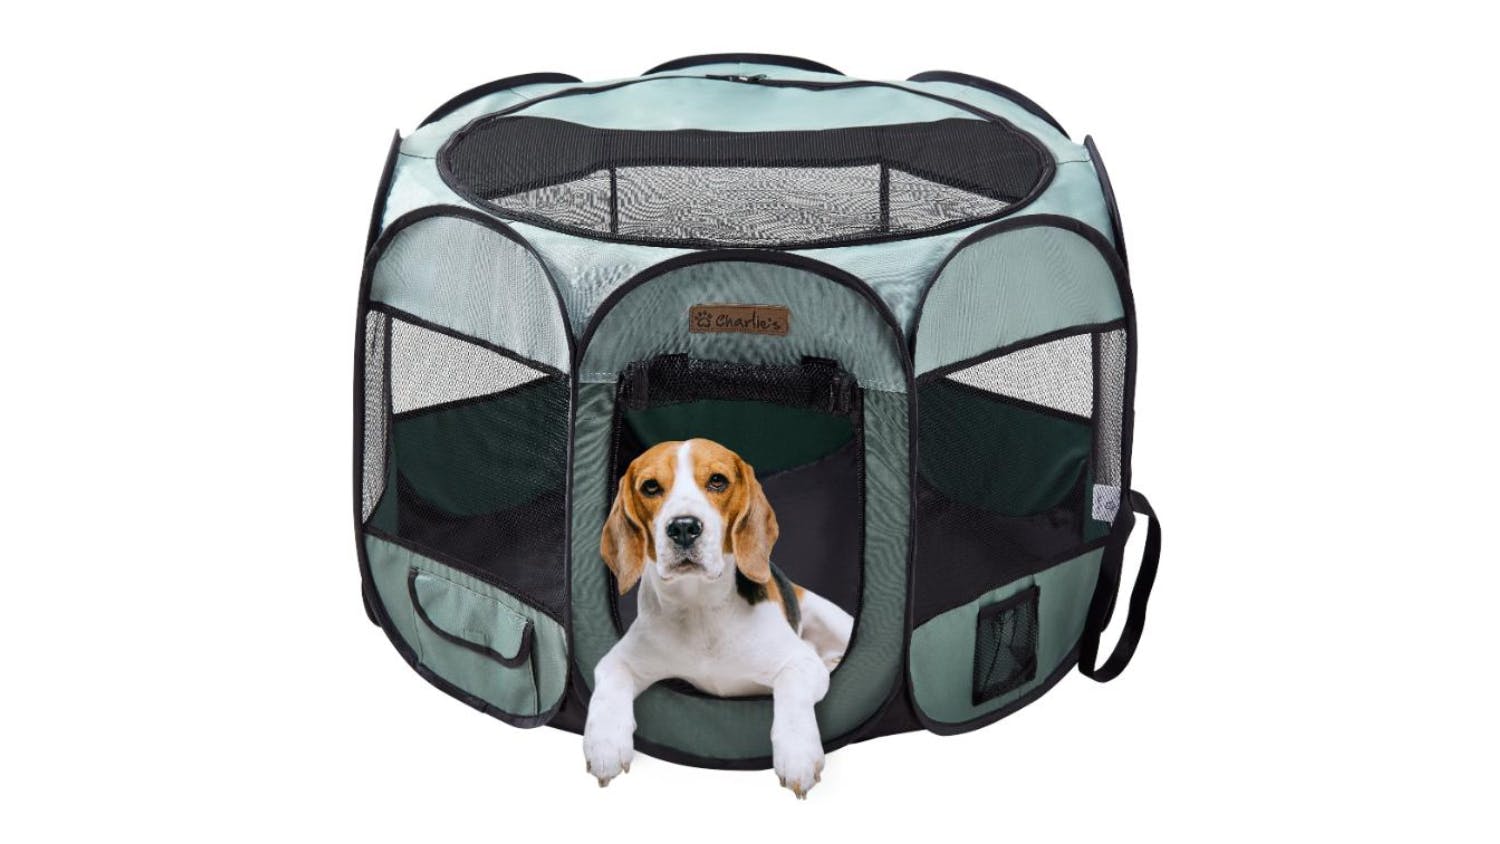 Charlie's Portable Folding Pet Playpen with Mesh Walls Small - Sage Green